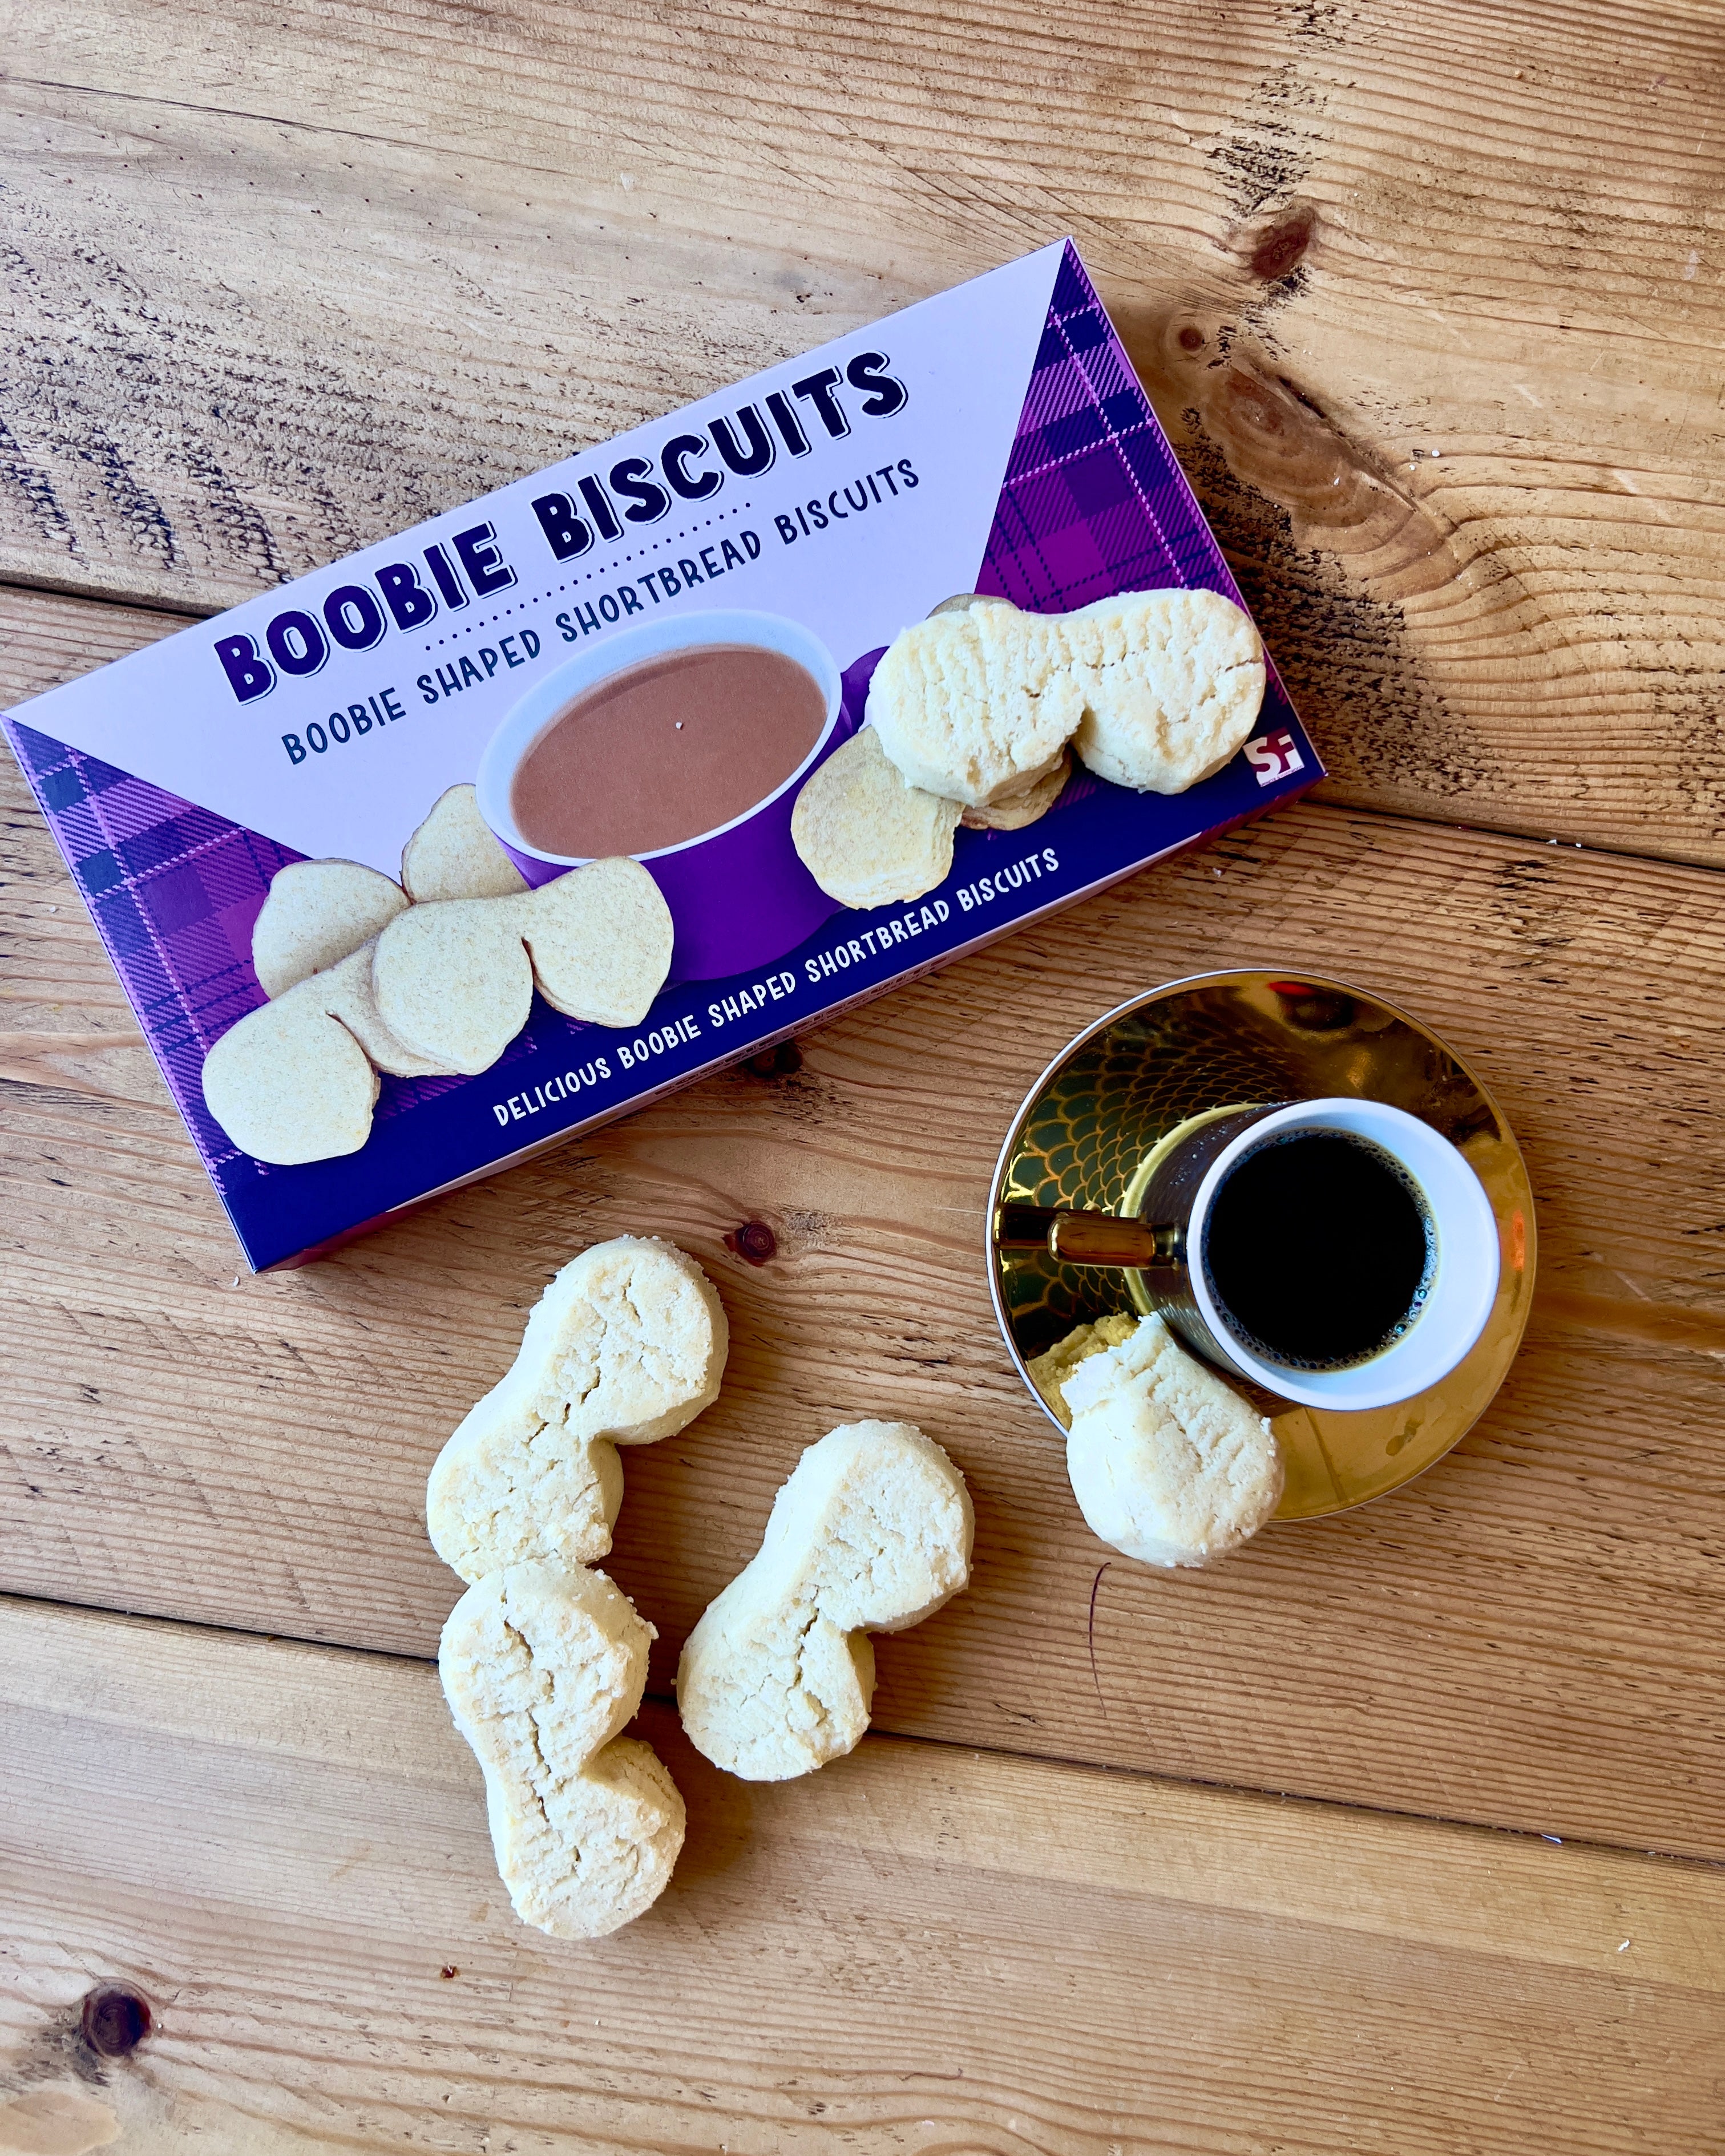 Do you like fun adult novelty biscuits? Well let us introduce you to our dunking Boobie Biscuits! They're traditional British made shortbread biscuits with a fun, adult twist.